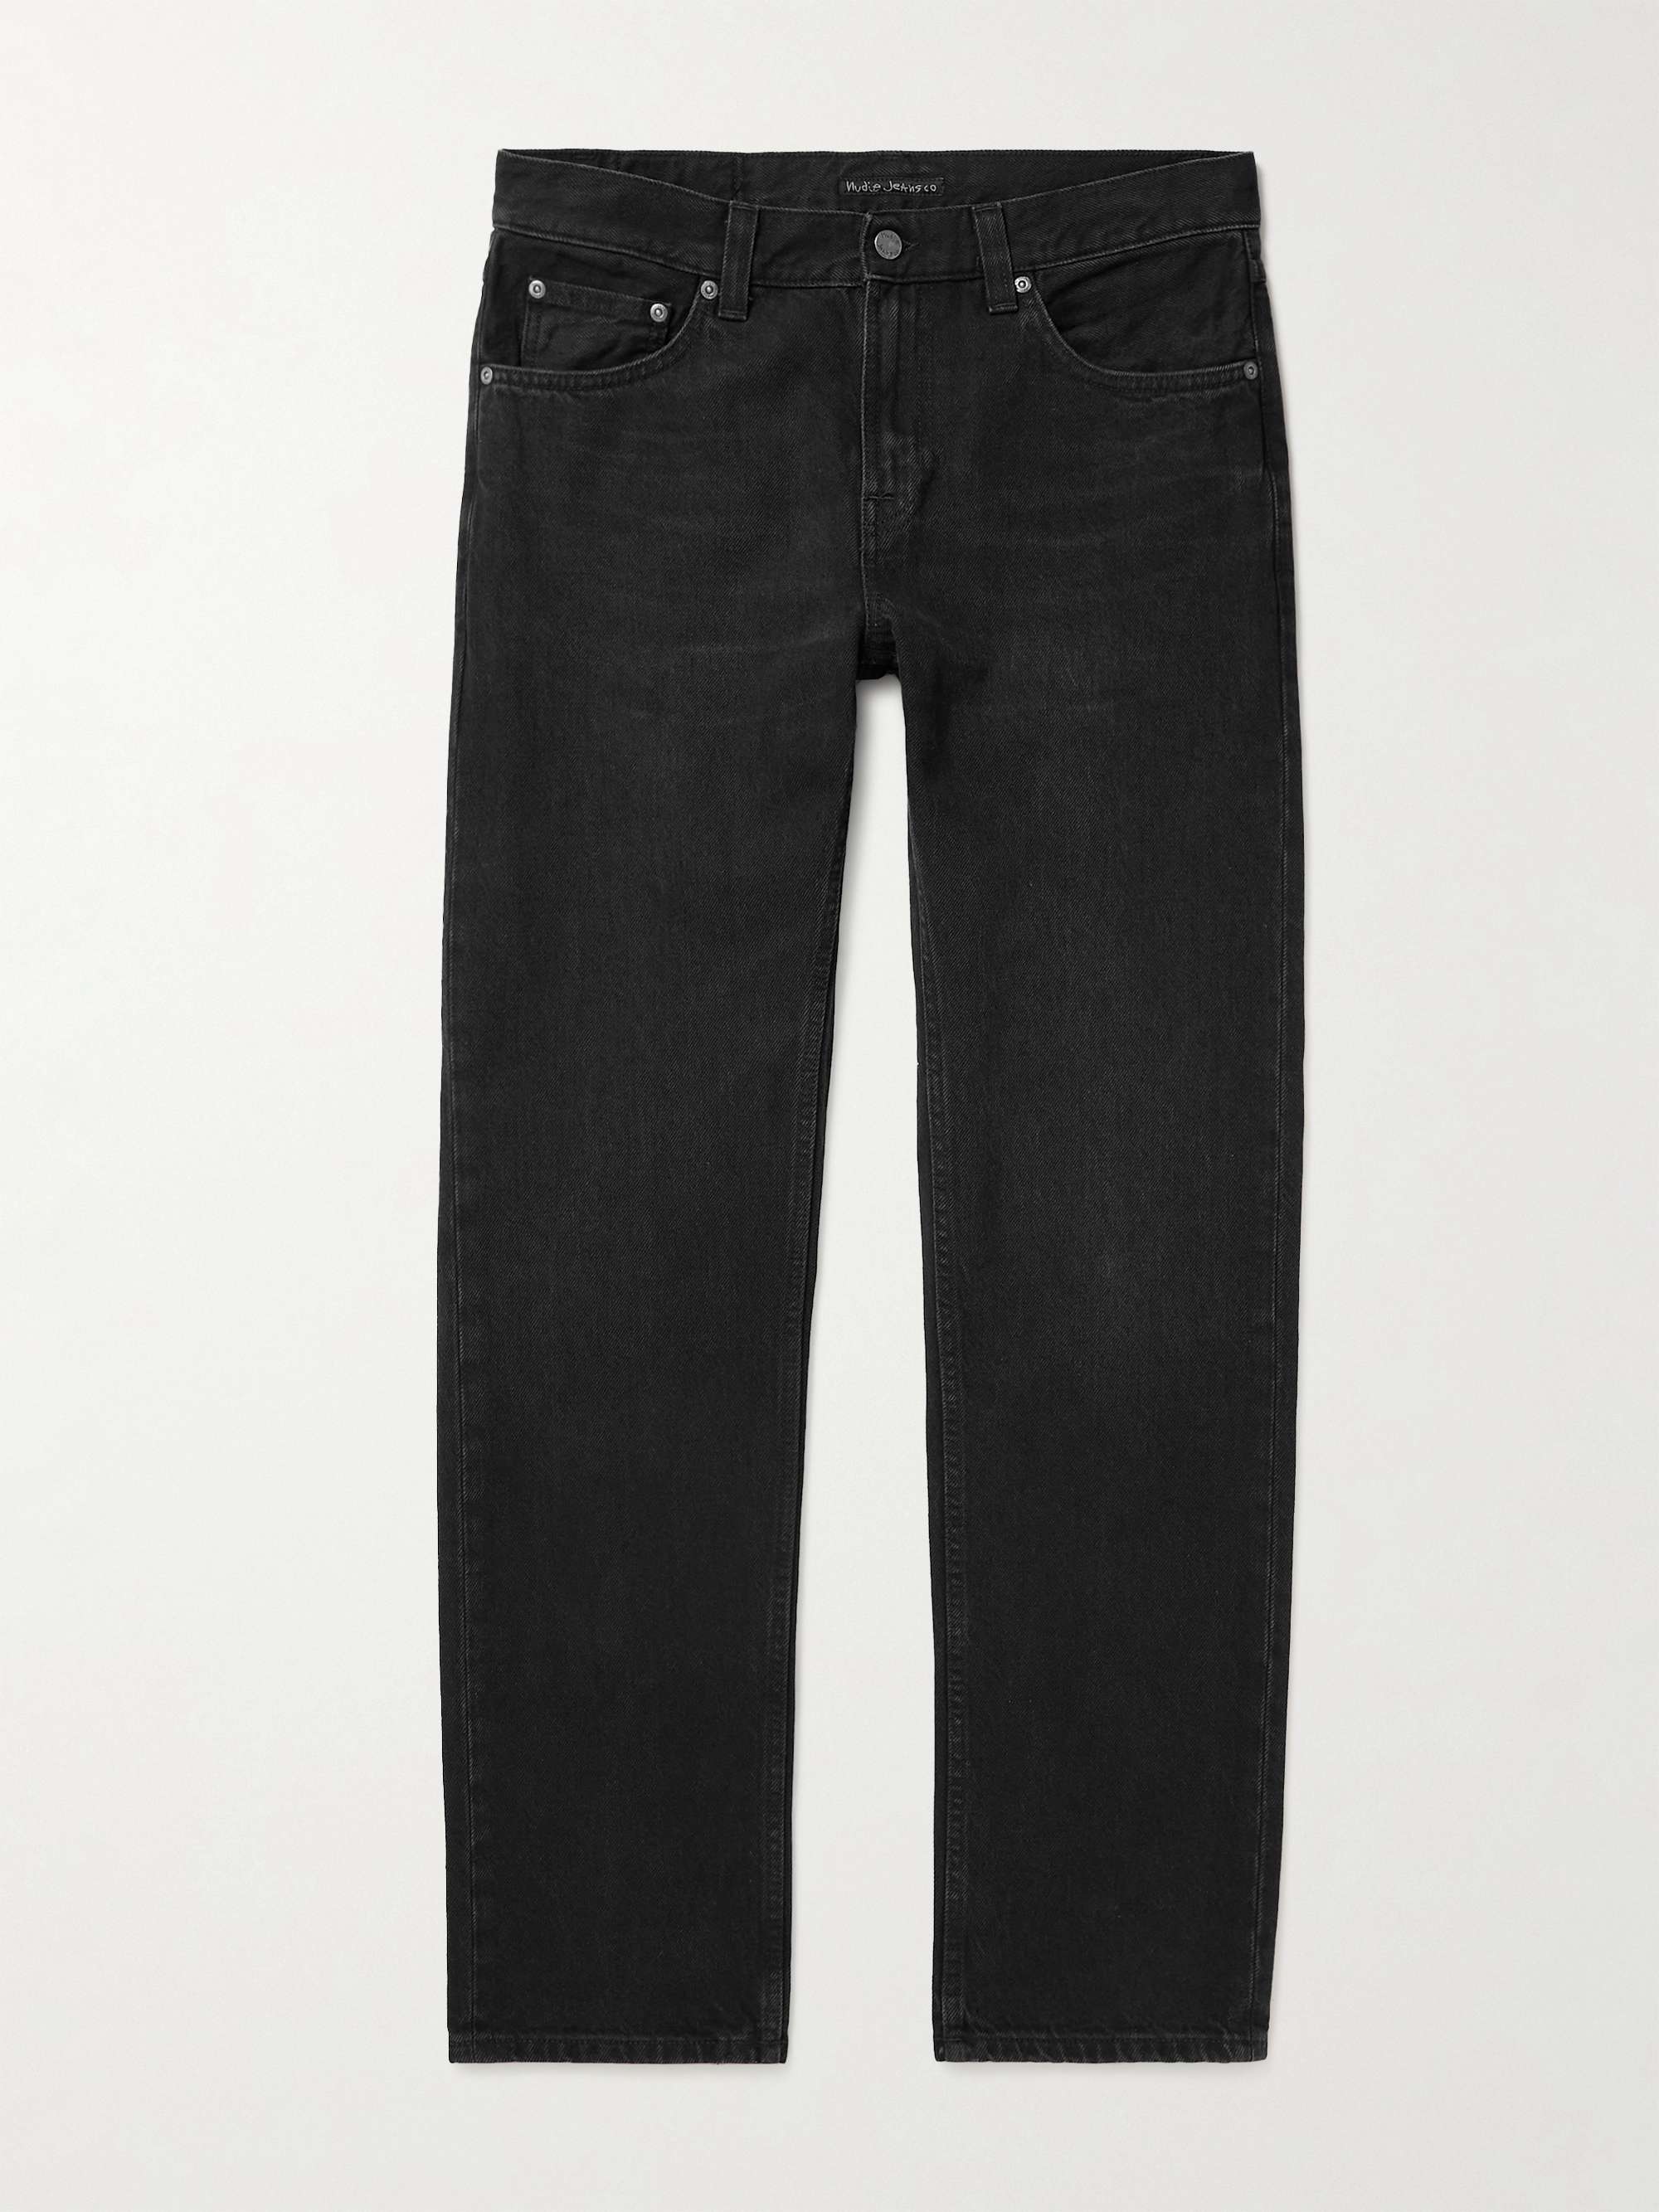 NUDIE JEANS Gritty Jackson Straight-Leg Jeans | MR PORTER